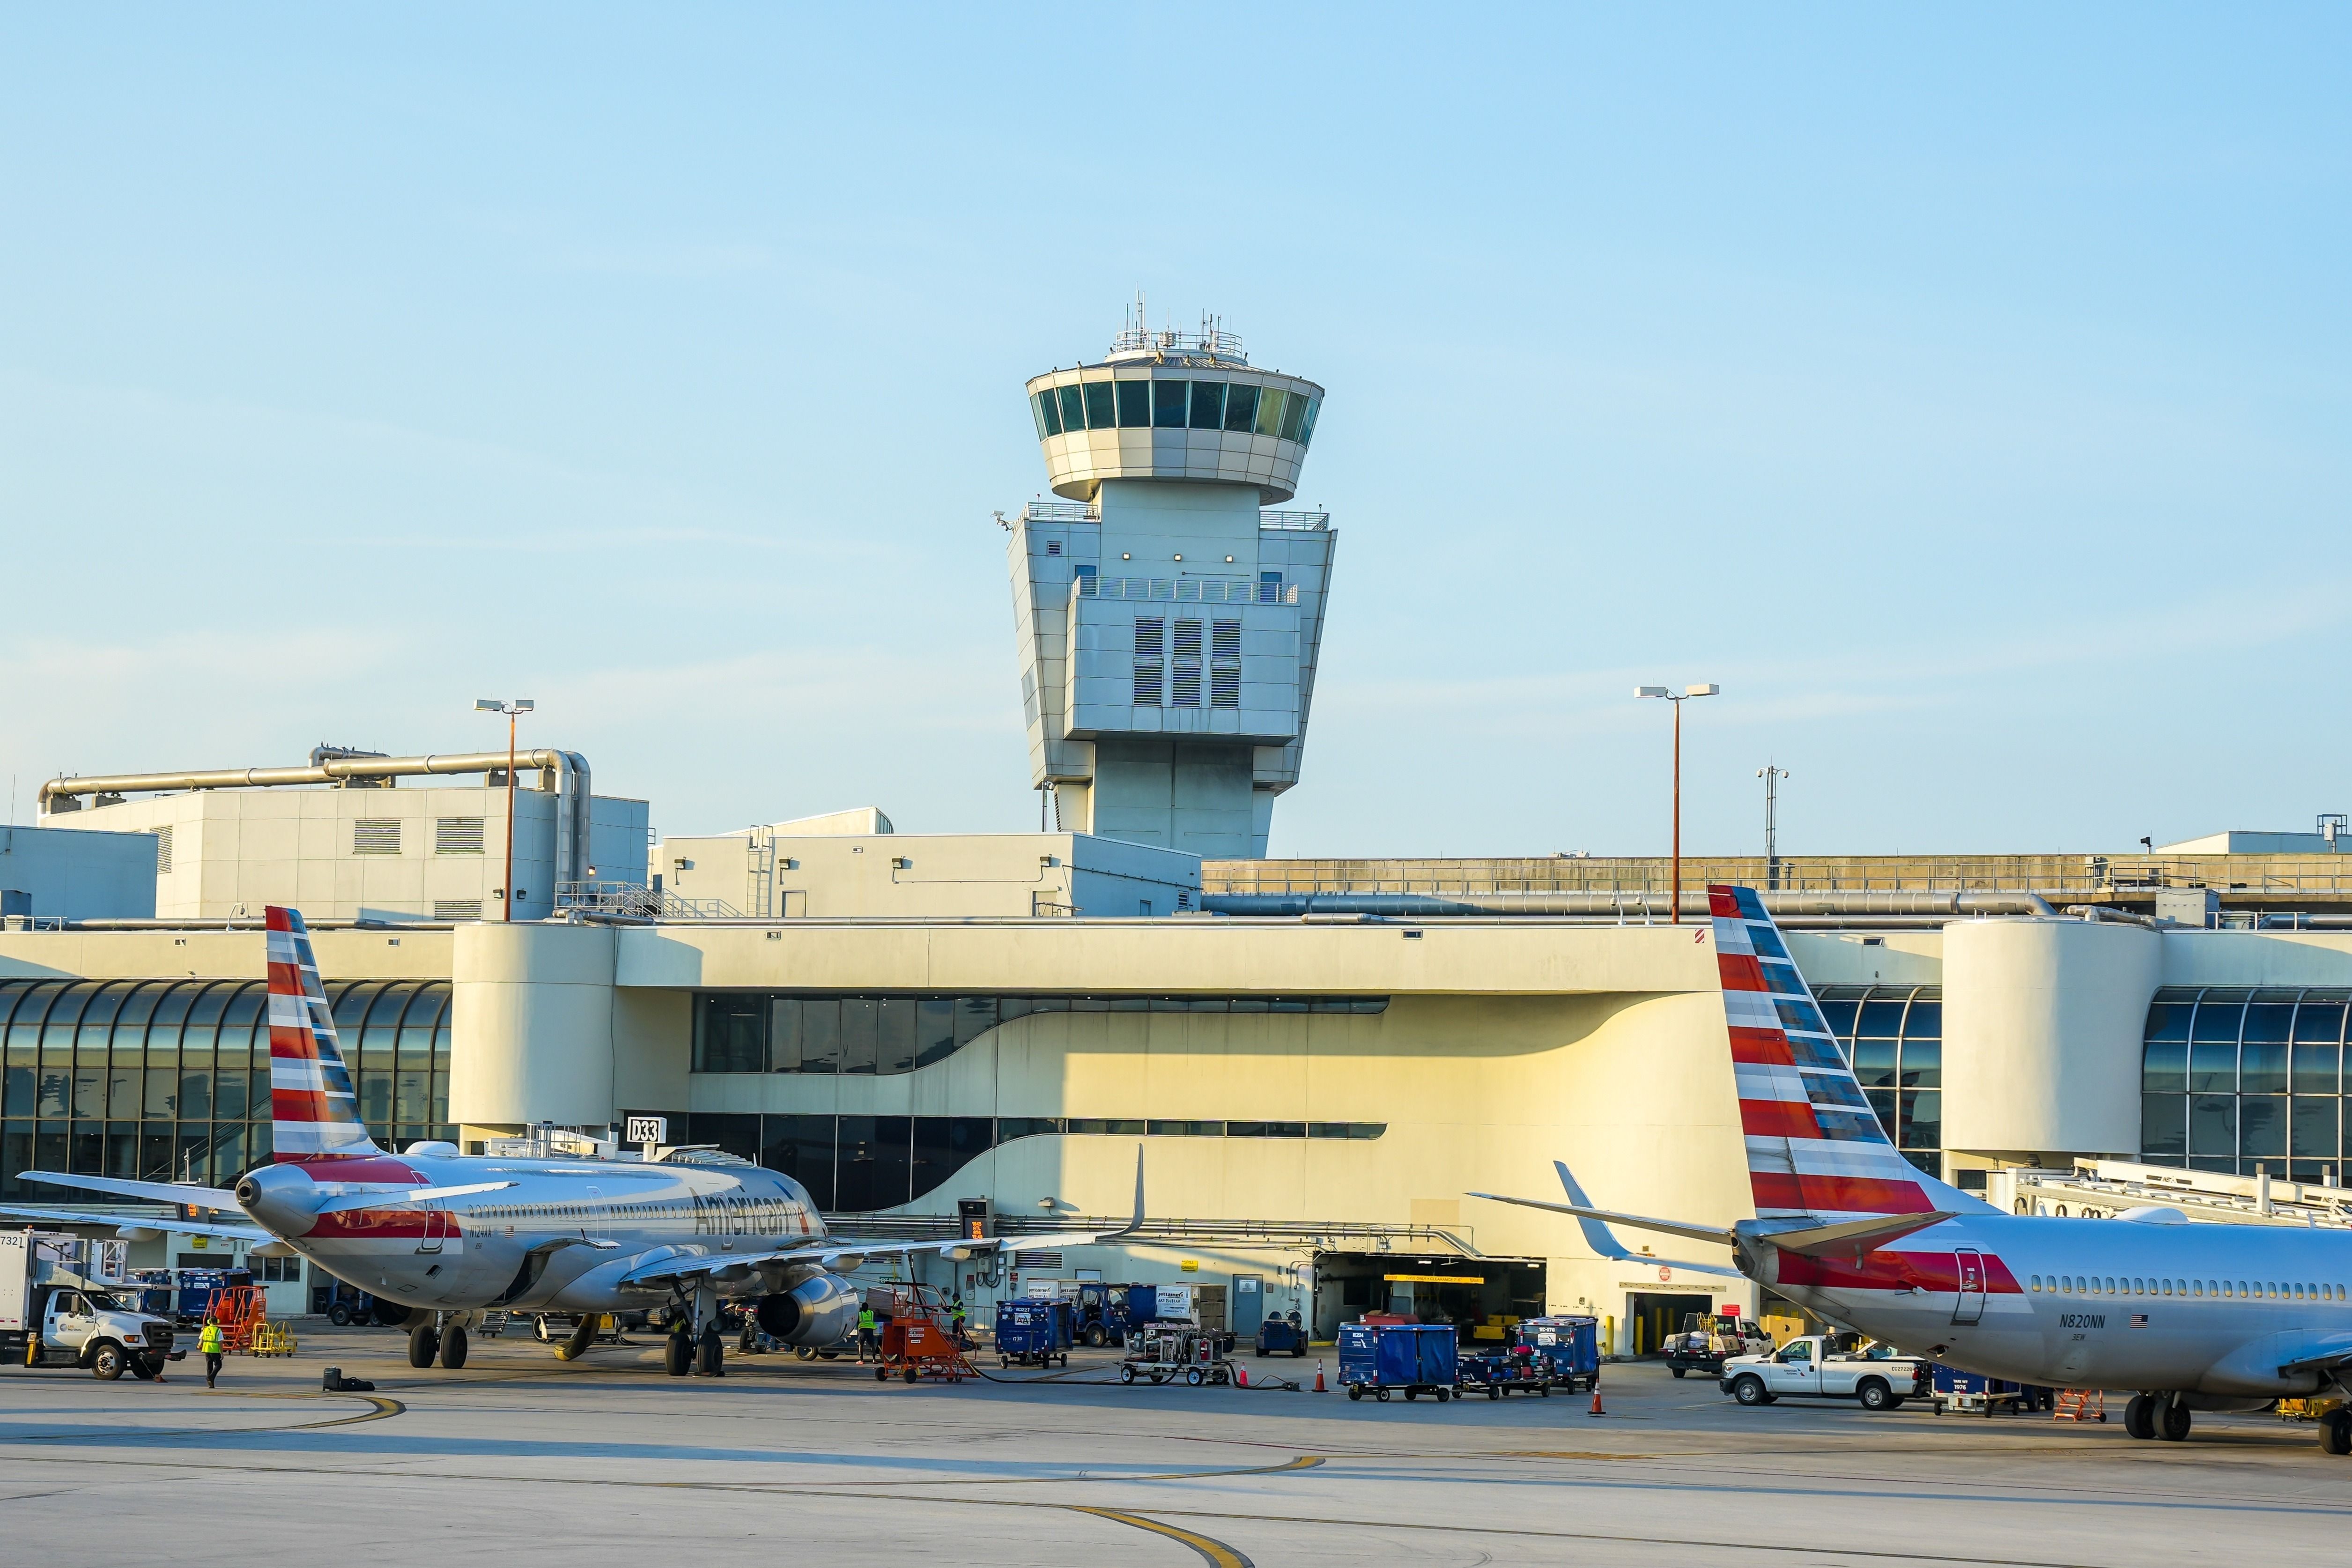 American Airlines planes at Miami Airport